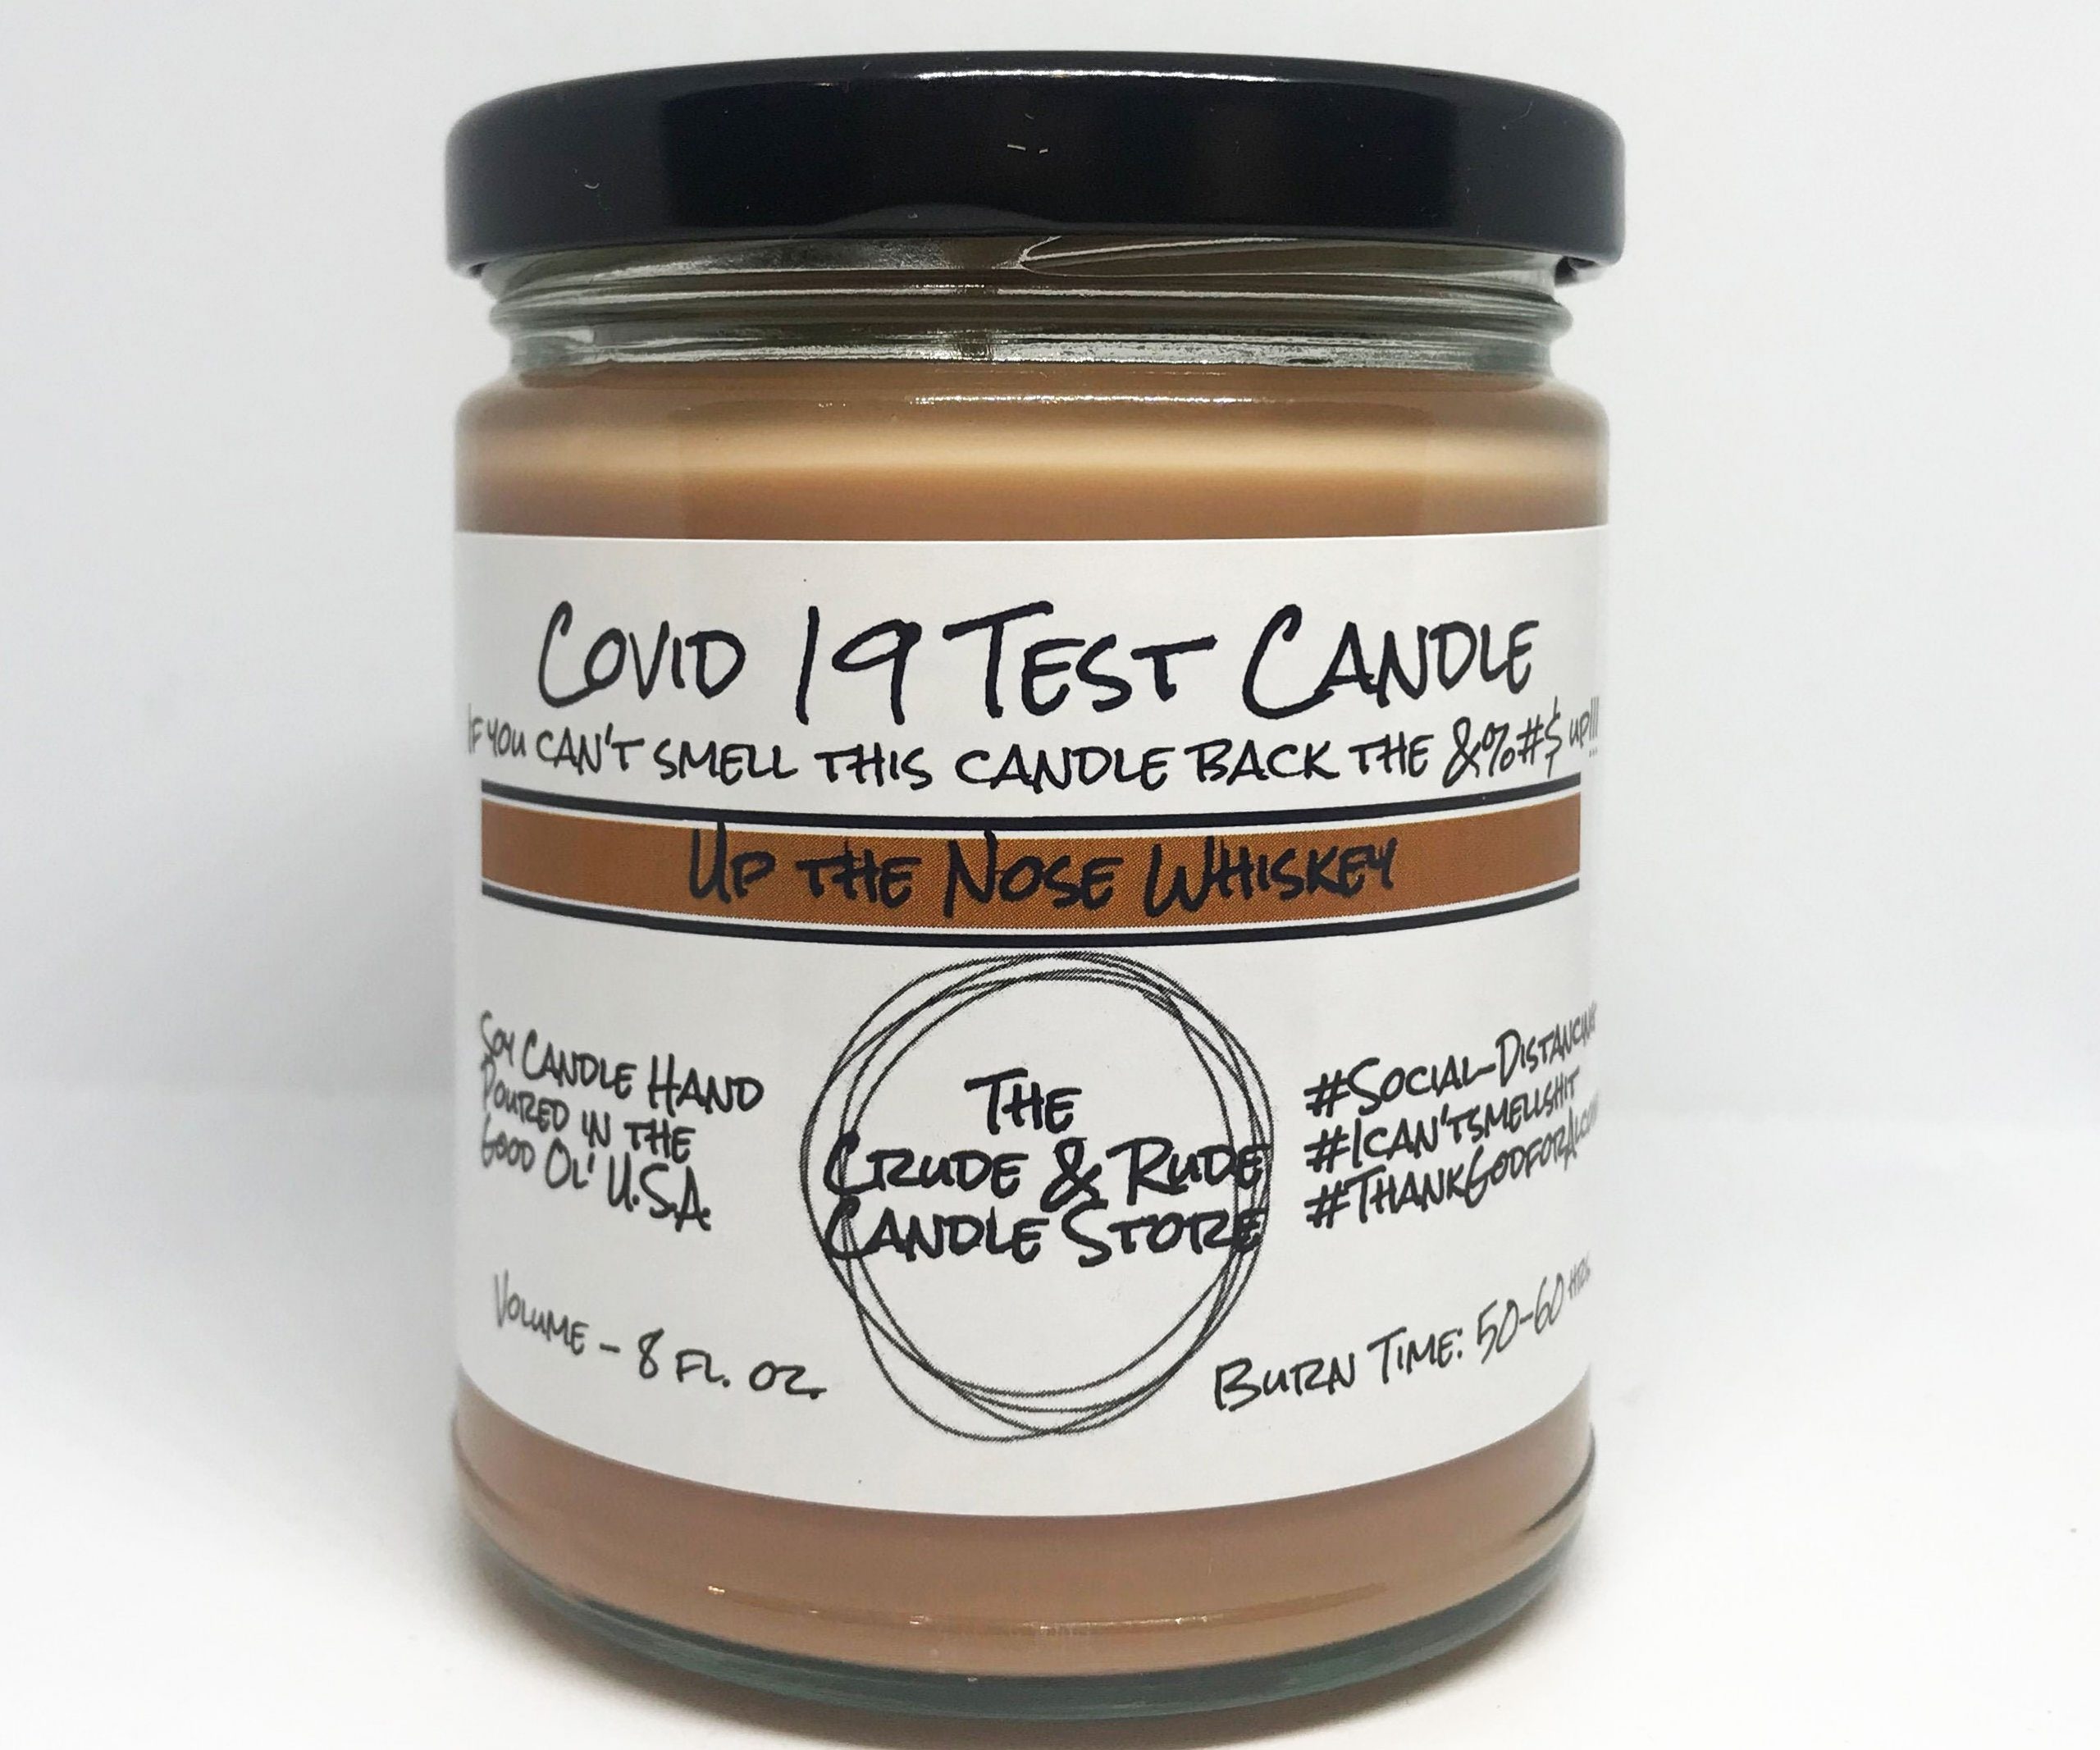 COVID-19 Scent Test Candle